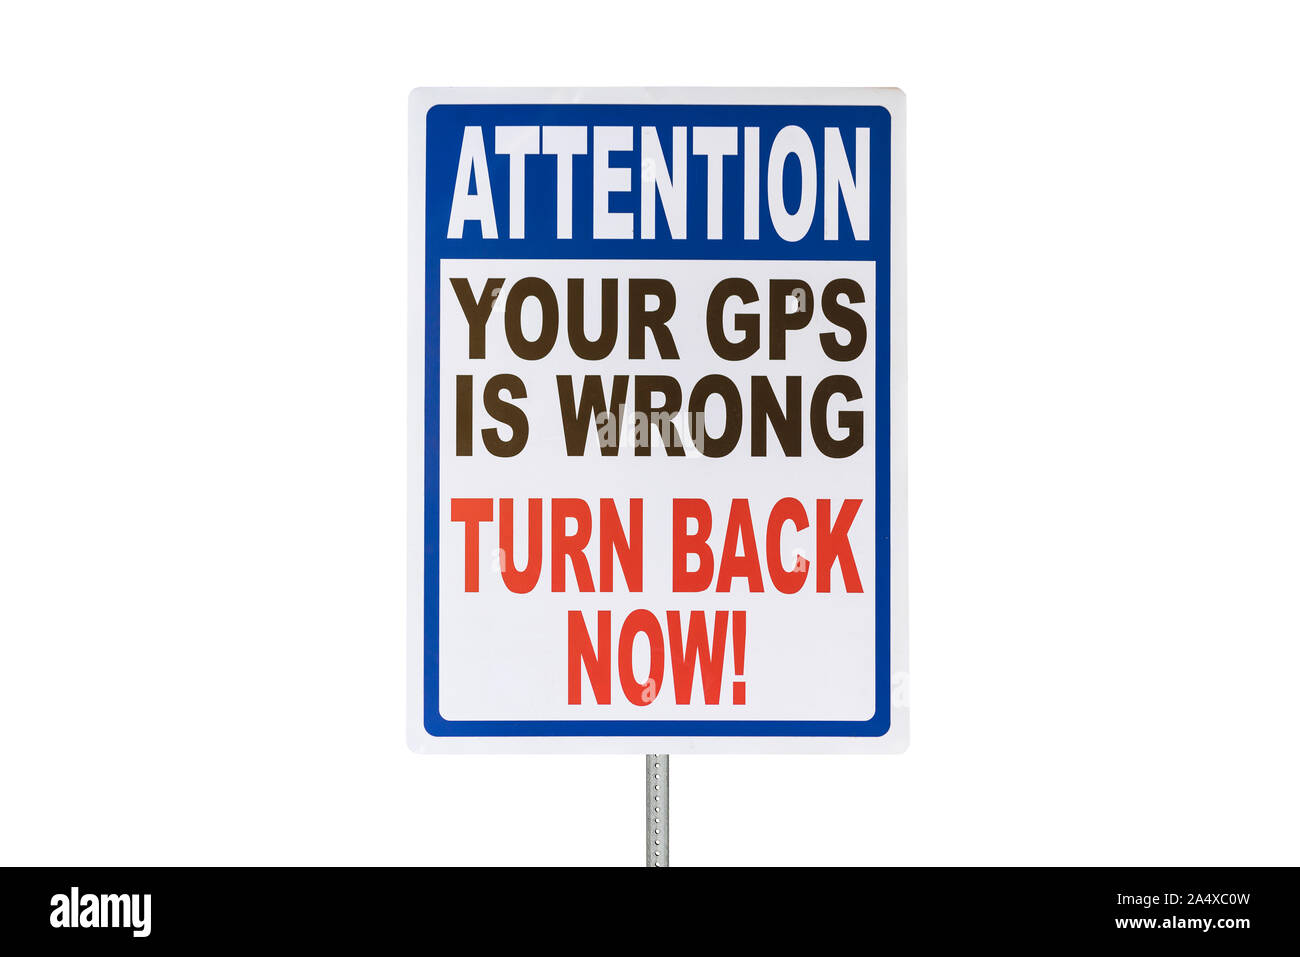 Attention your gps is wrong turn back now warning sign isolated on white. Stock Photo